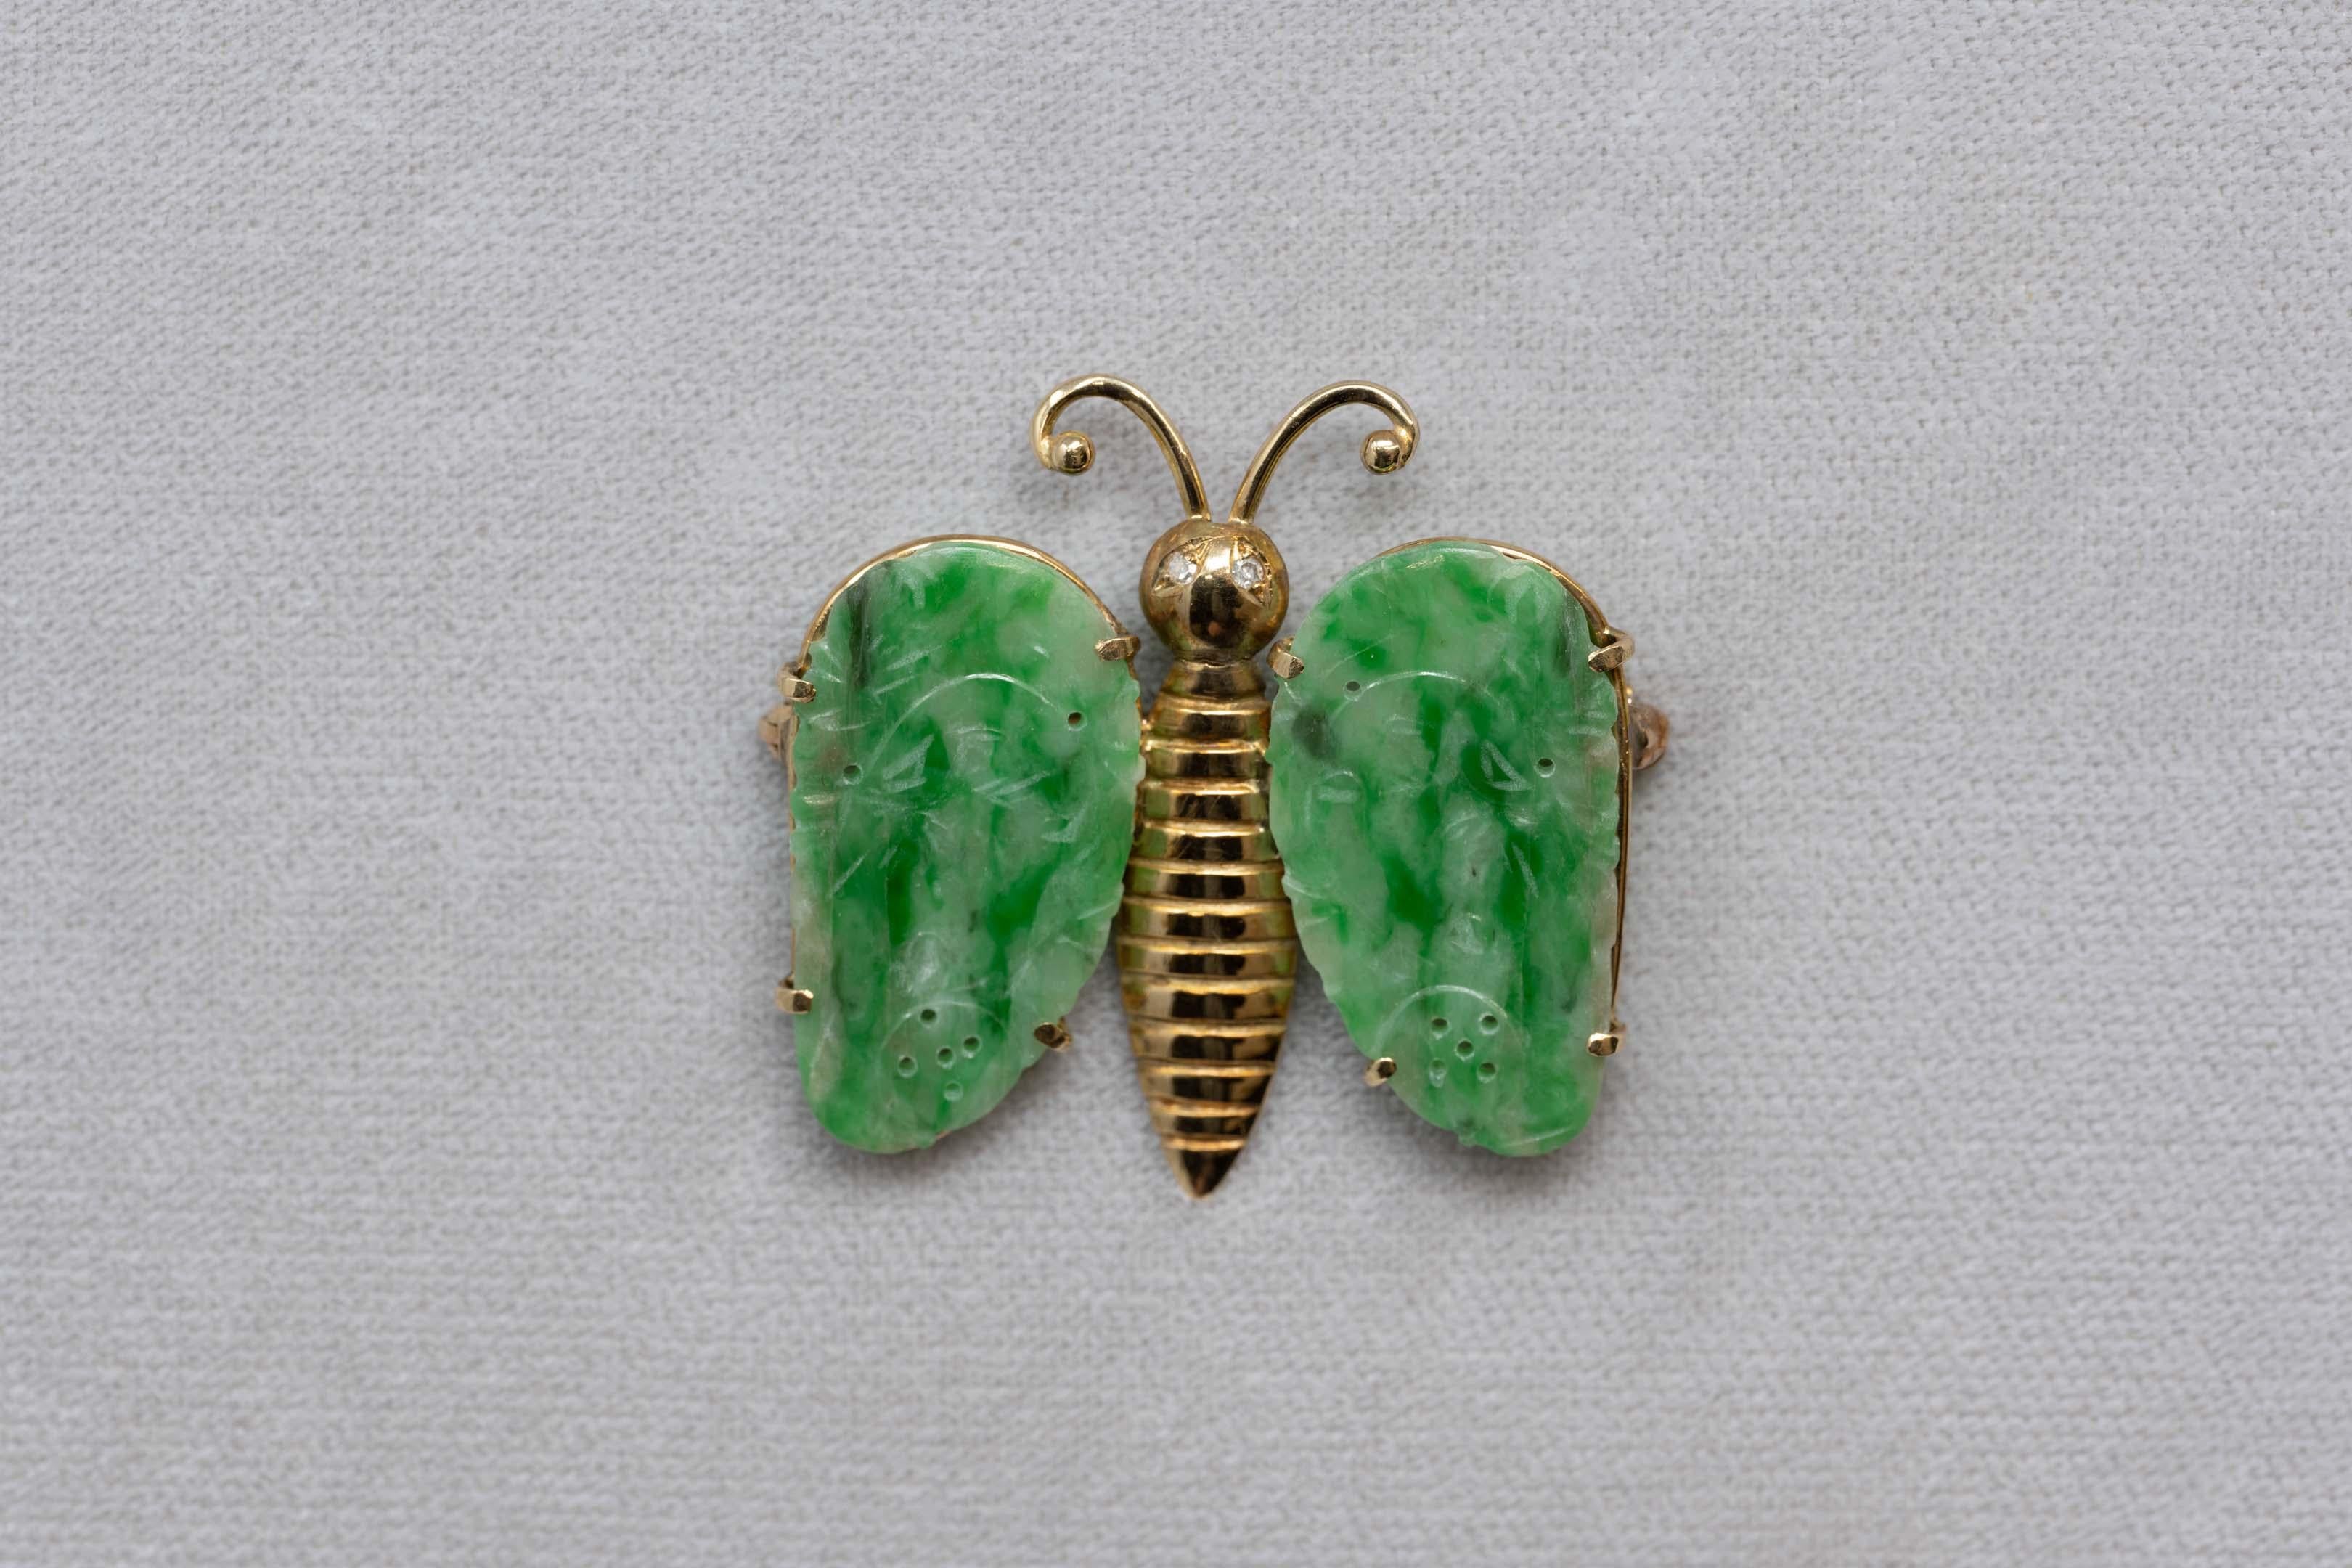 14k acid tested butterfly shaped brooch set with two diamonds on the eyes and two carved jadeite's which measures 25mm x 14mm each. White to vivid green color. The brooch is unmarked, measures 35mm x 33mm. Come with COA. 5.8 grams.
